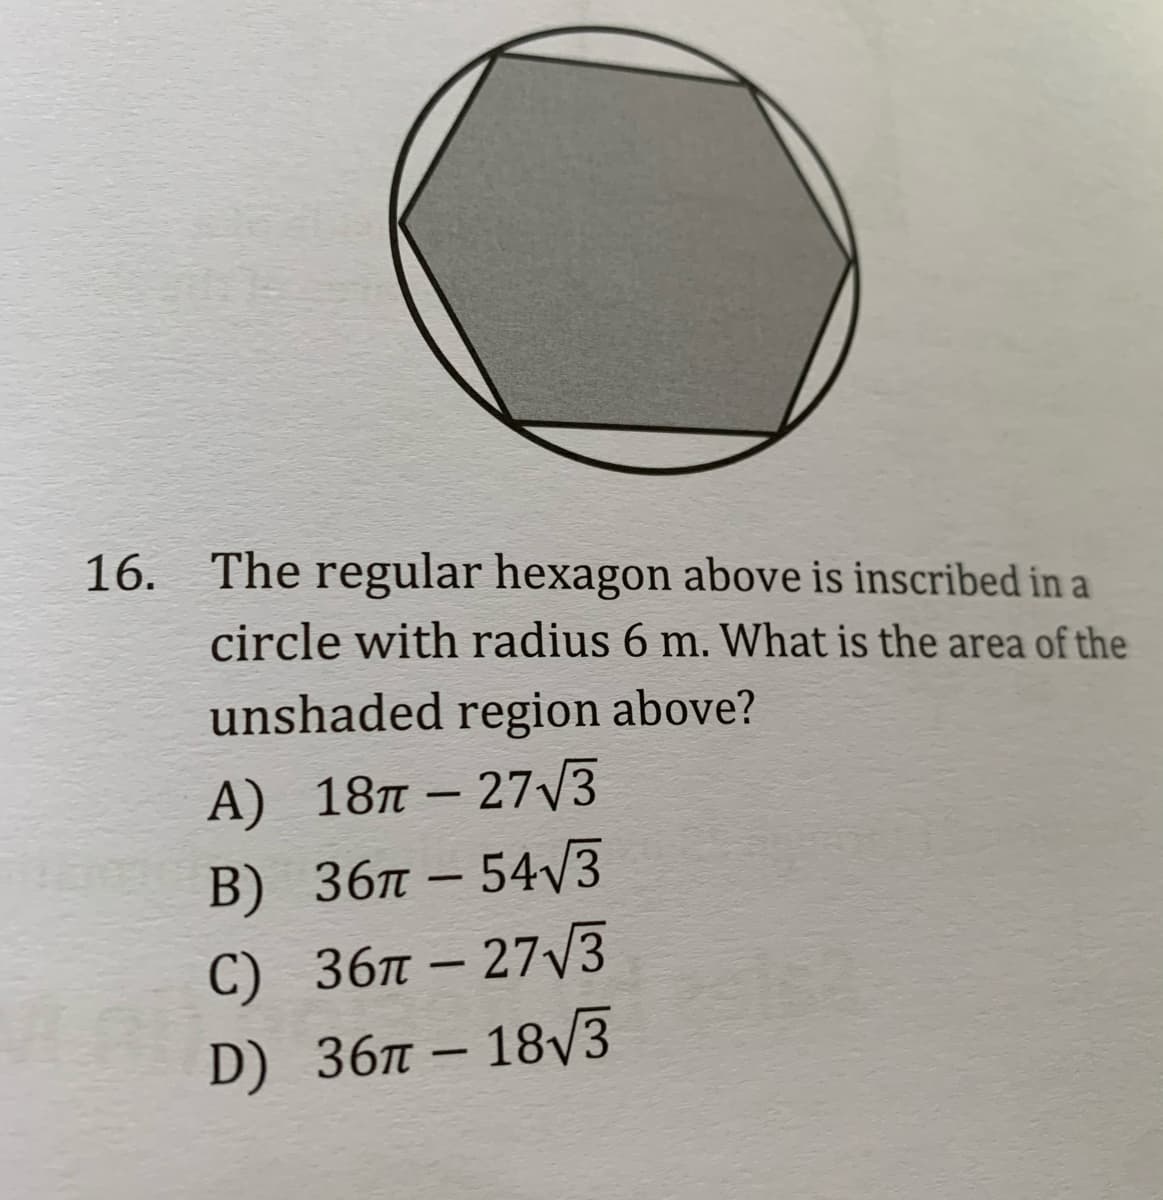 16. The regular hexagon above is inscribed in a
circle with radius 6 m. What is the area of the
unshaded region above?
А) 18п - 273
B) 36л - 54/3
C) 36л - 27/3
D) 36л — 18V3
